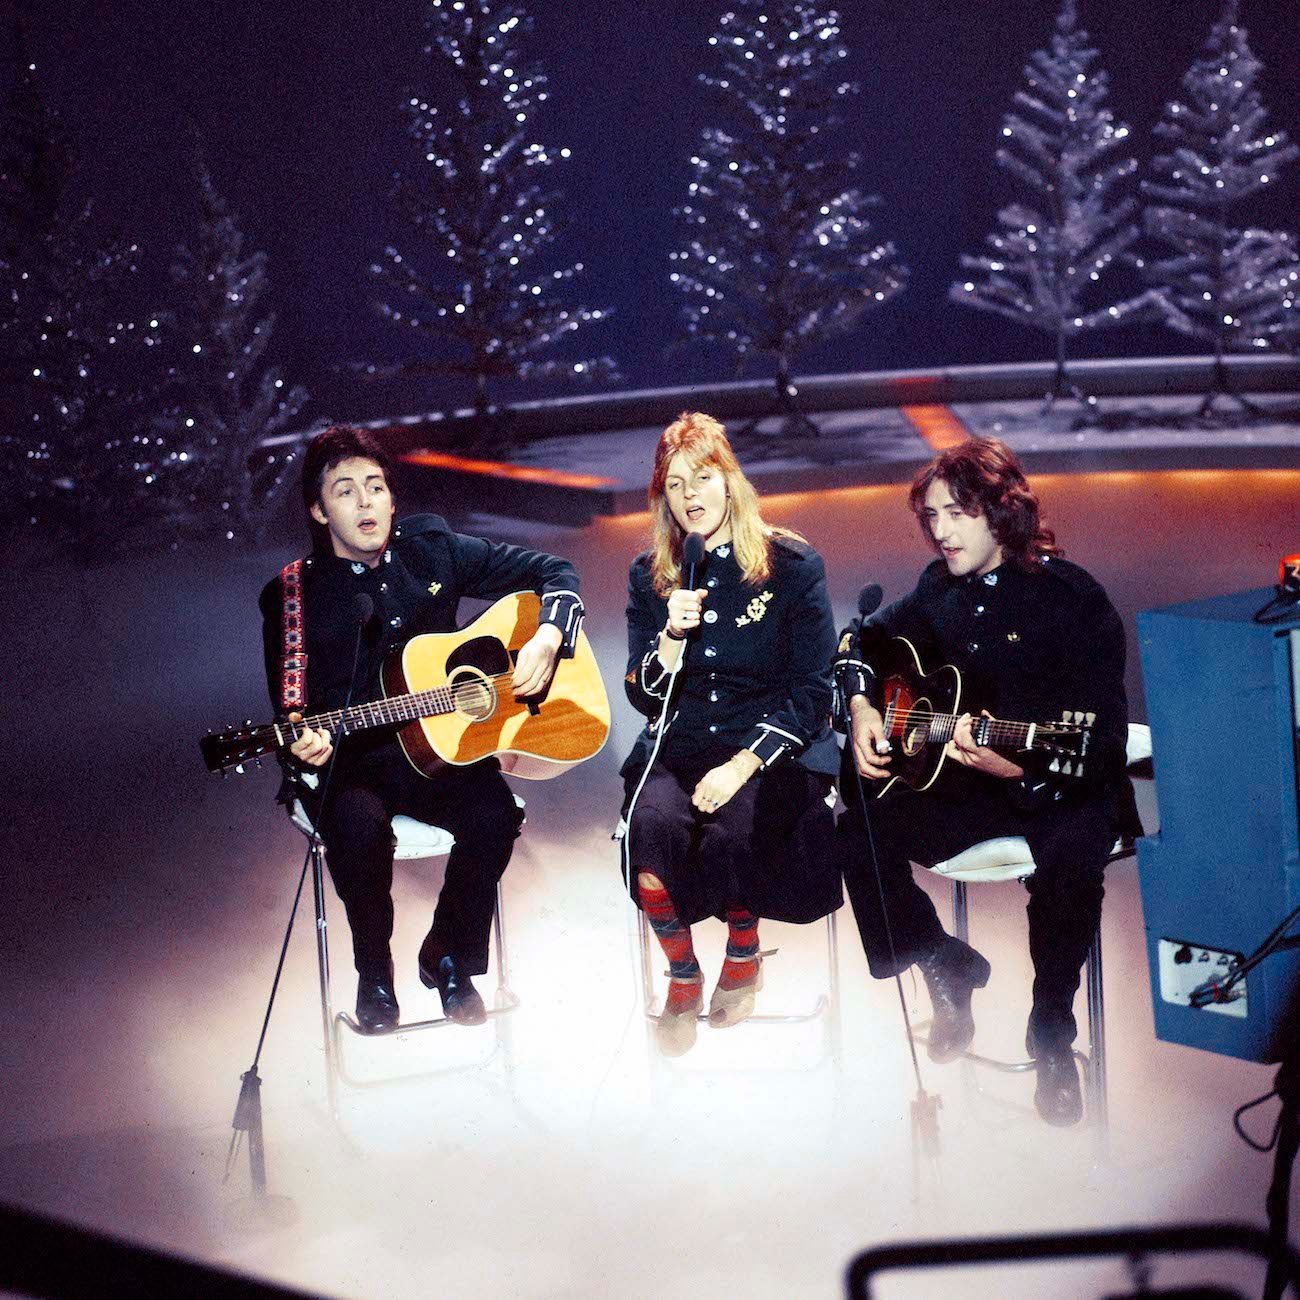 Paul McCartney and his wife, Linda recording a Christmas special in 1977.